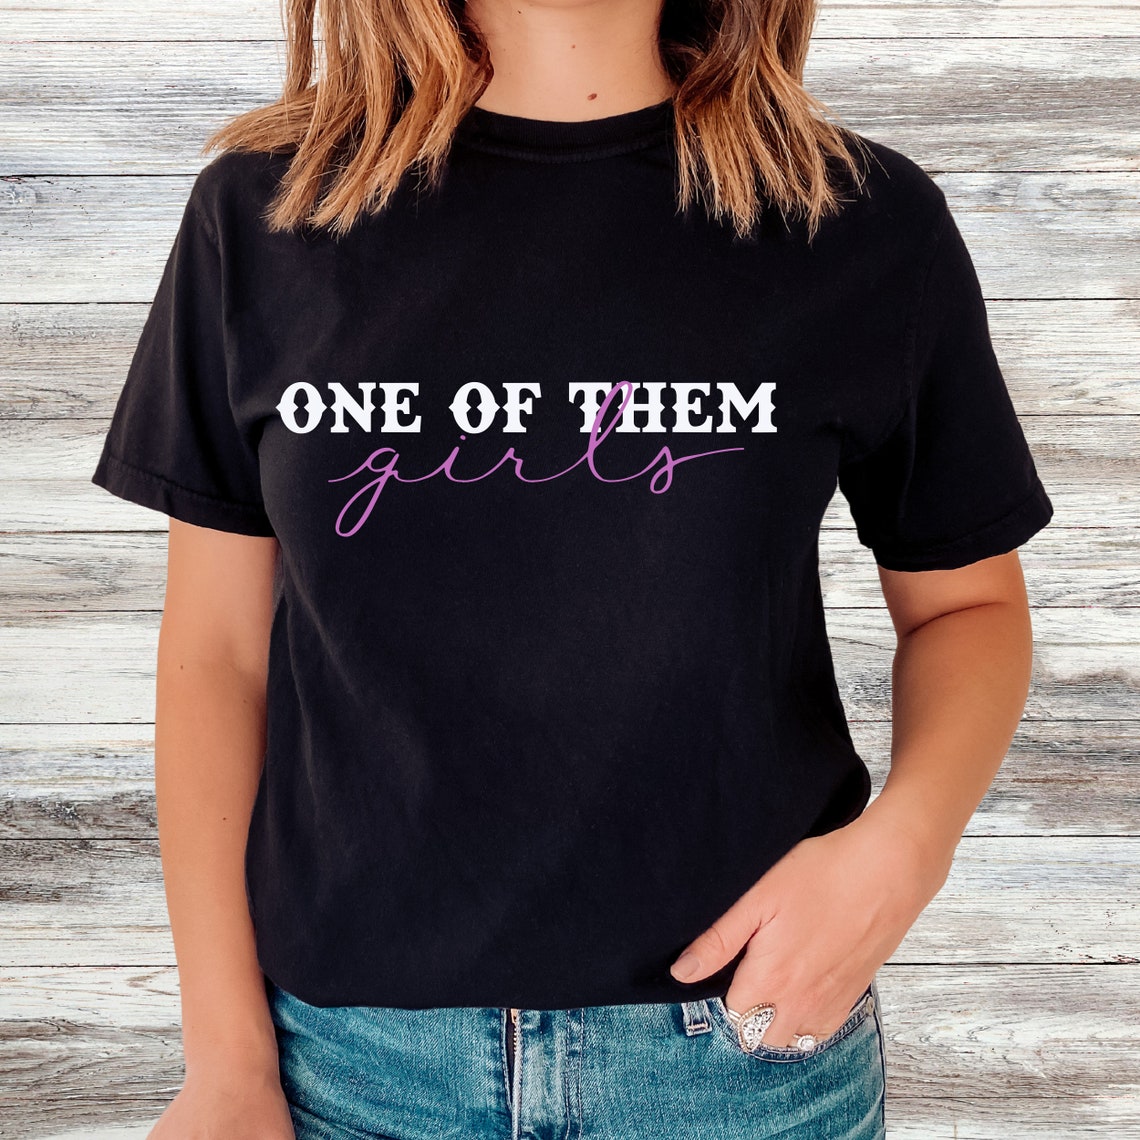 Lee Brice One of Them Girls Shirt One of Them Girls Country | Etsy